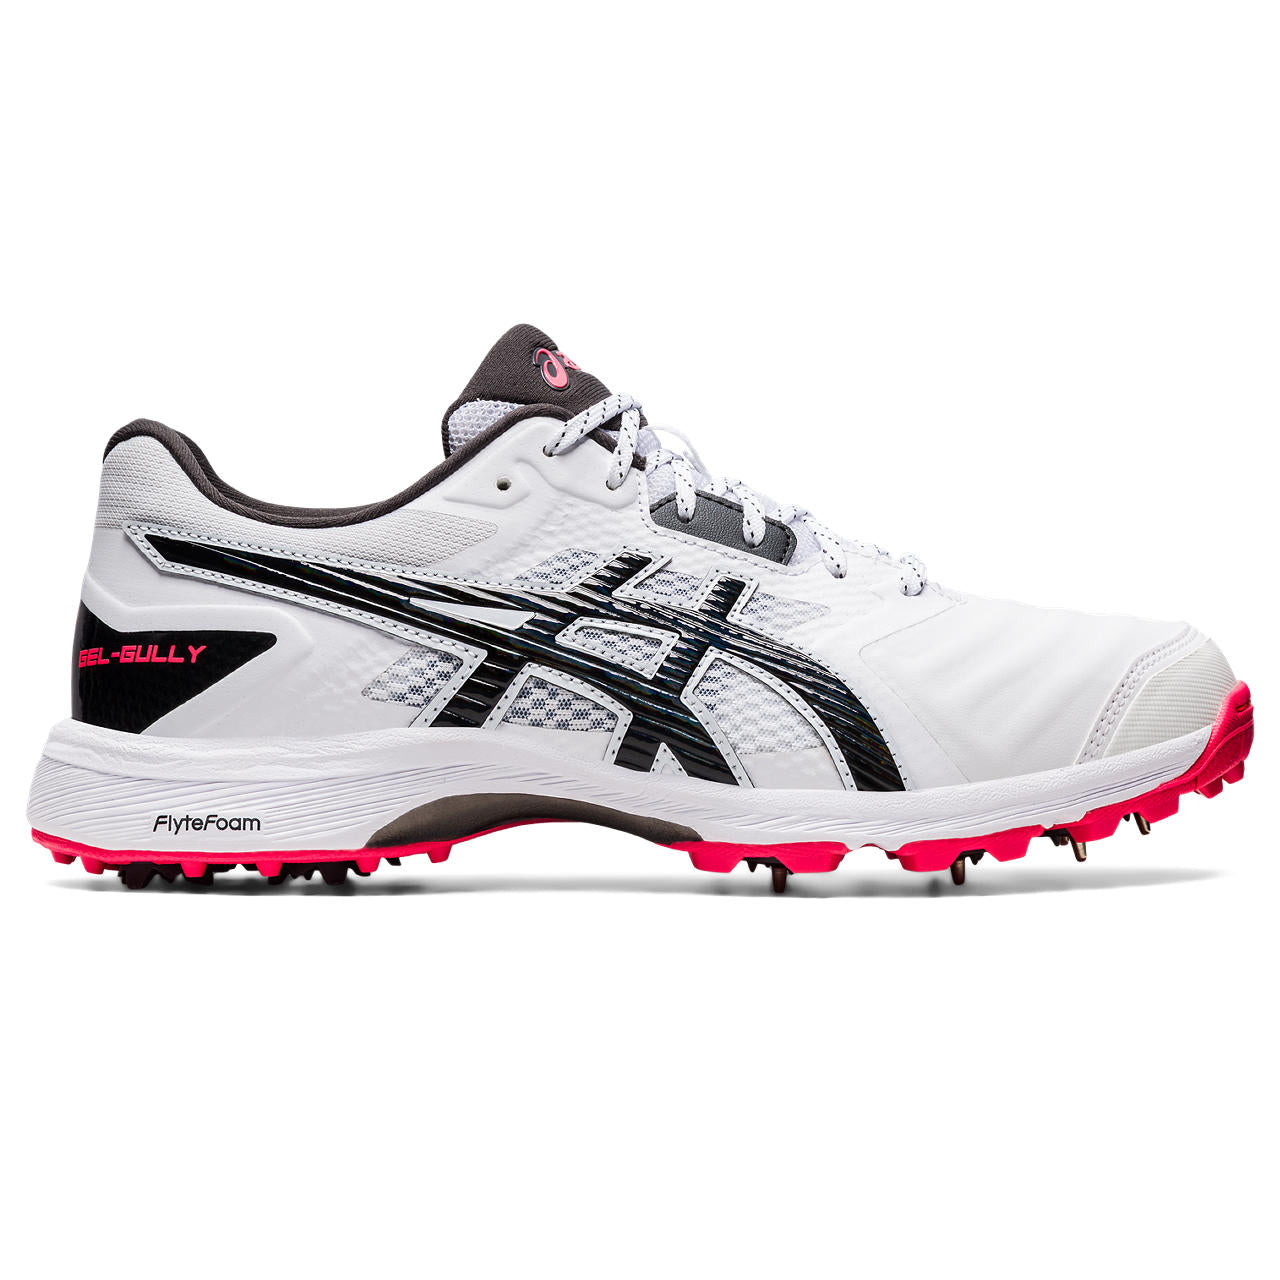 Asics Gel Gully 7 Cricket Spikes White/Red